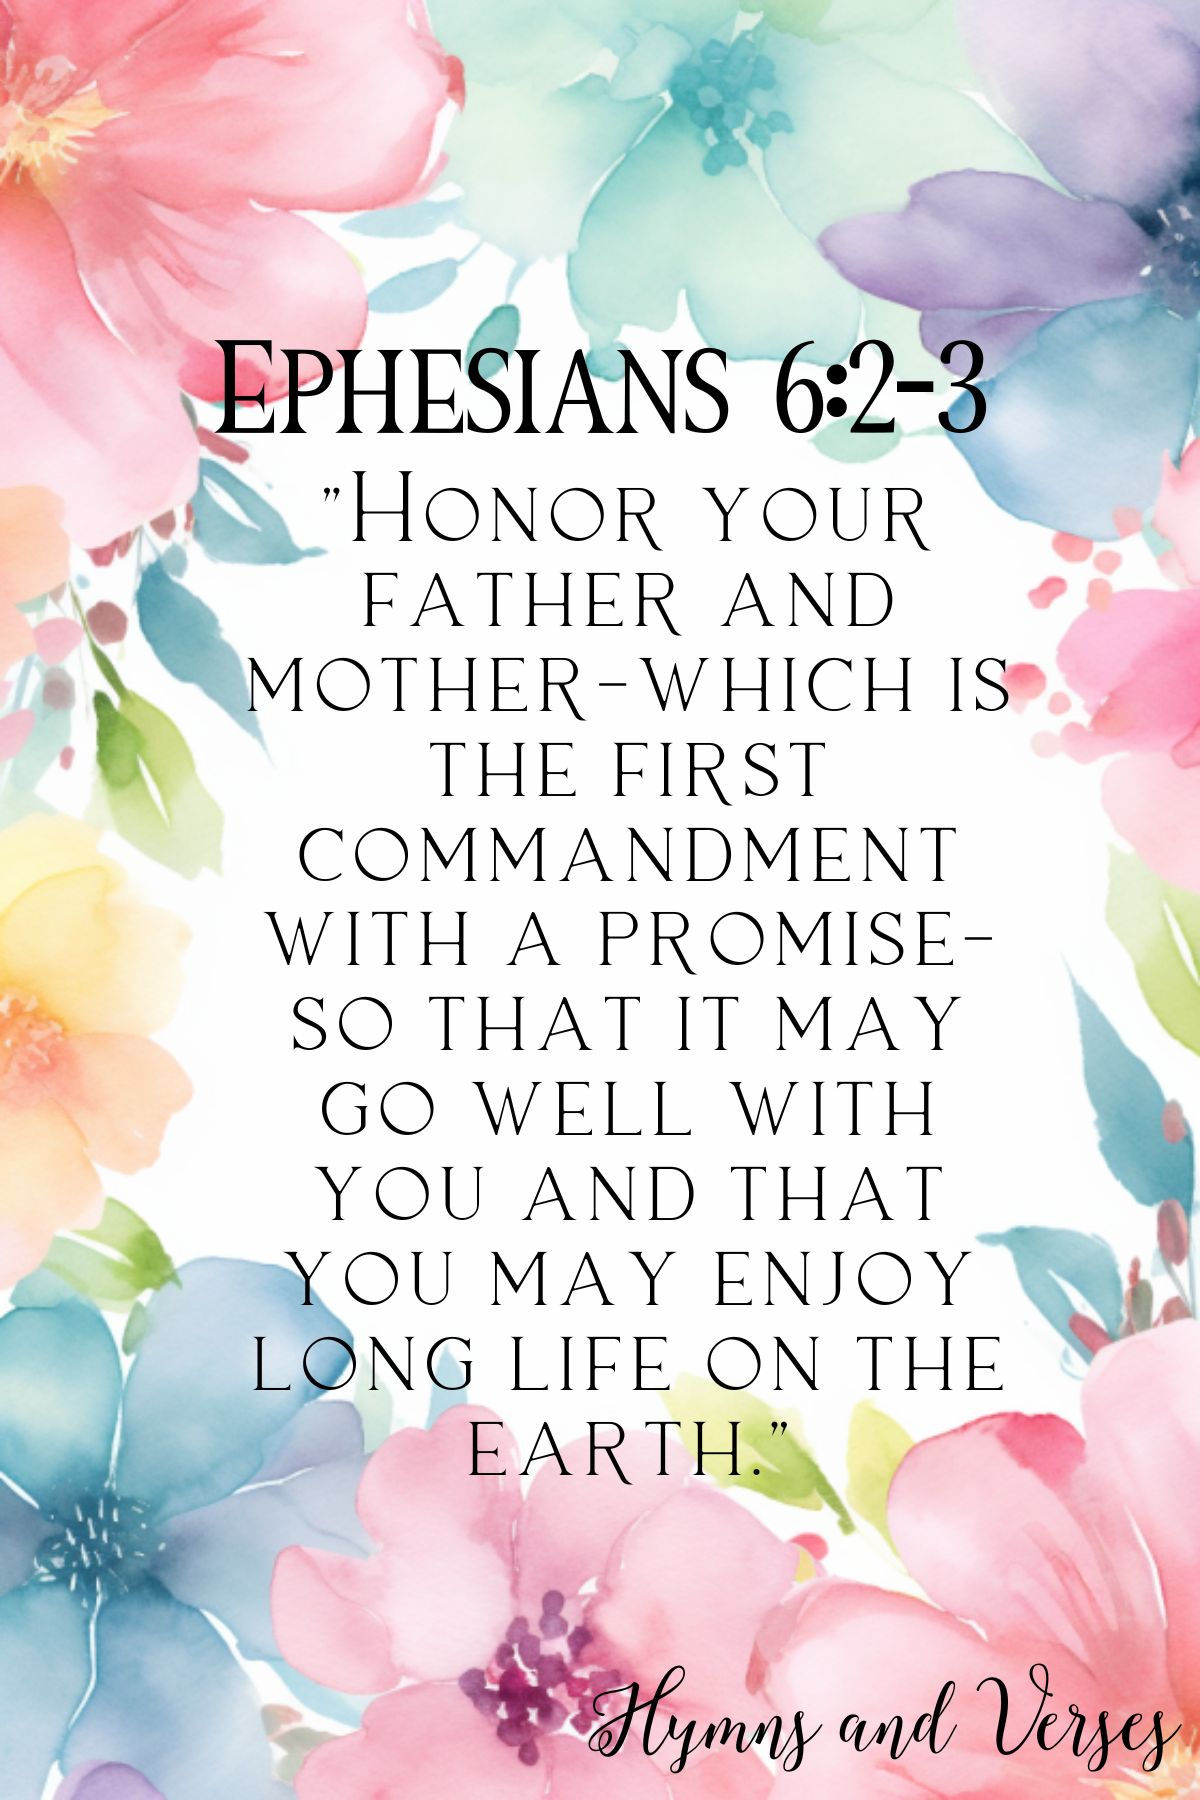 Ephesians 6:2-3 bible verse for mothers birthday with pretty floral background